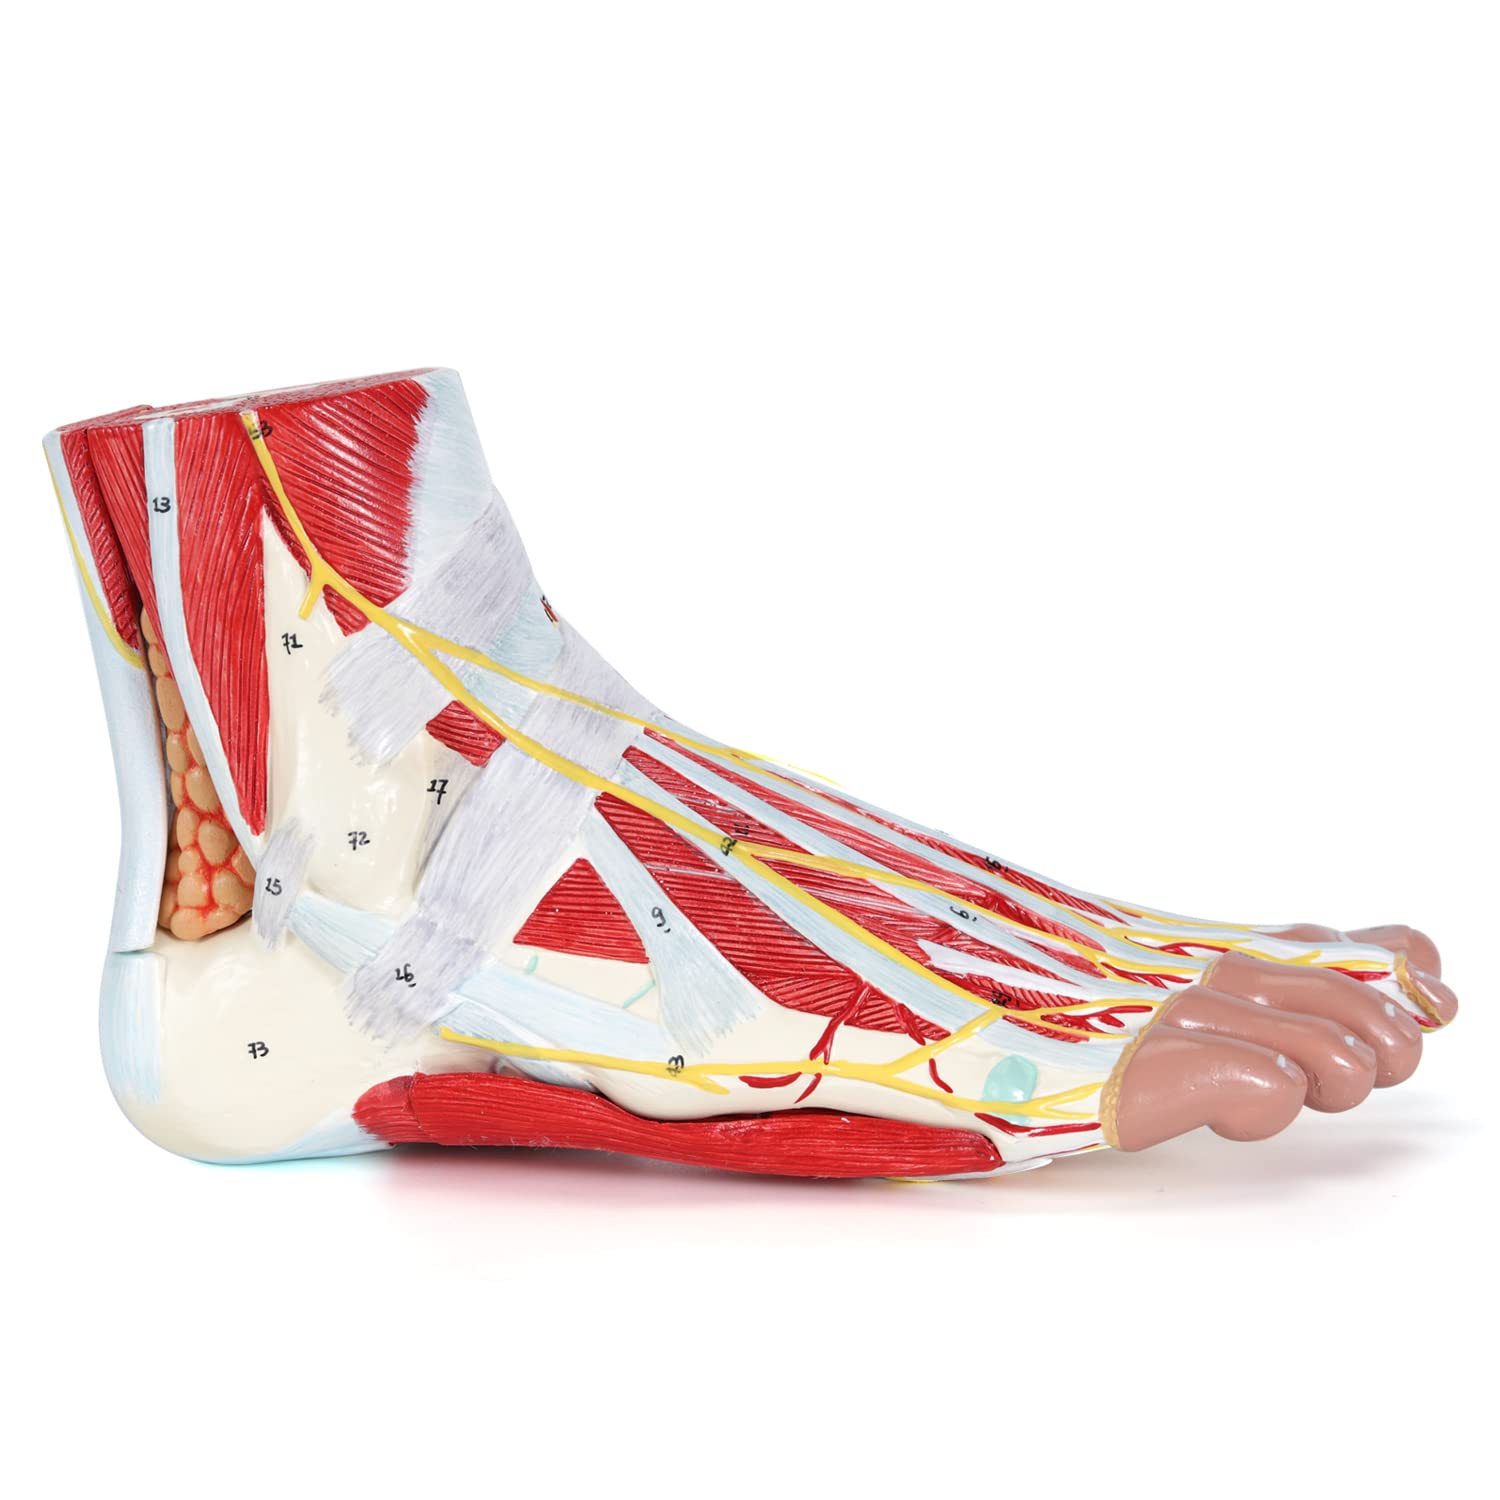 RONTEN Human Foot Anatomy Model With 9 Detachable Parts With The Muscles Ligaments Nerves And Arteries